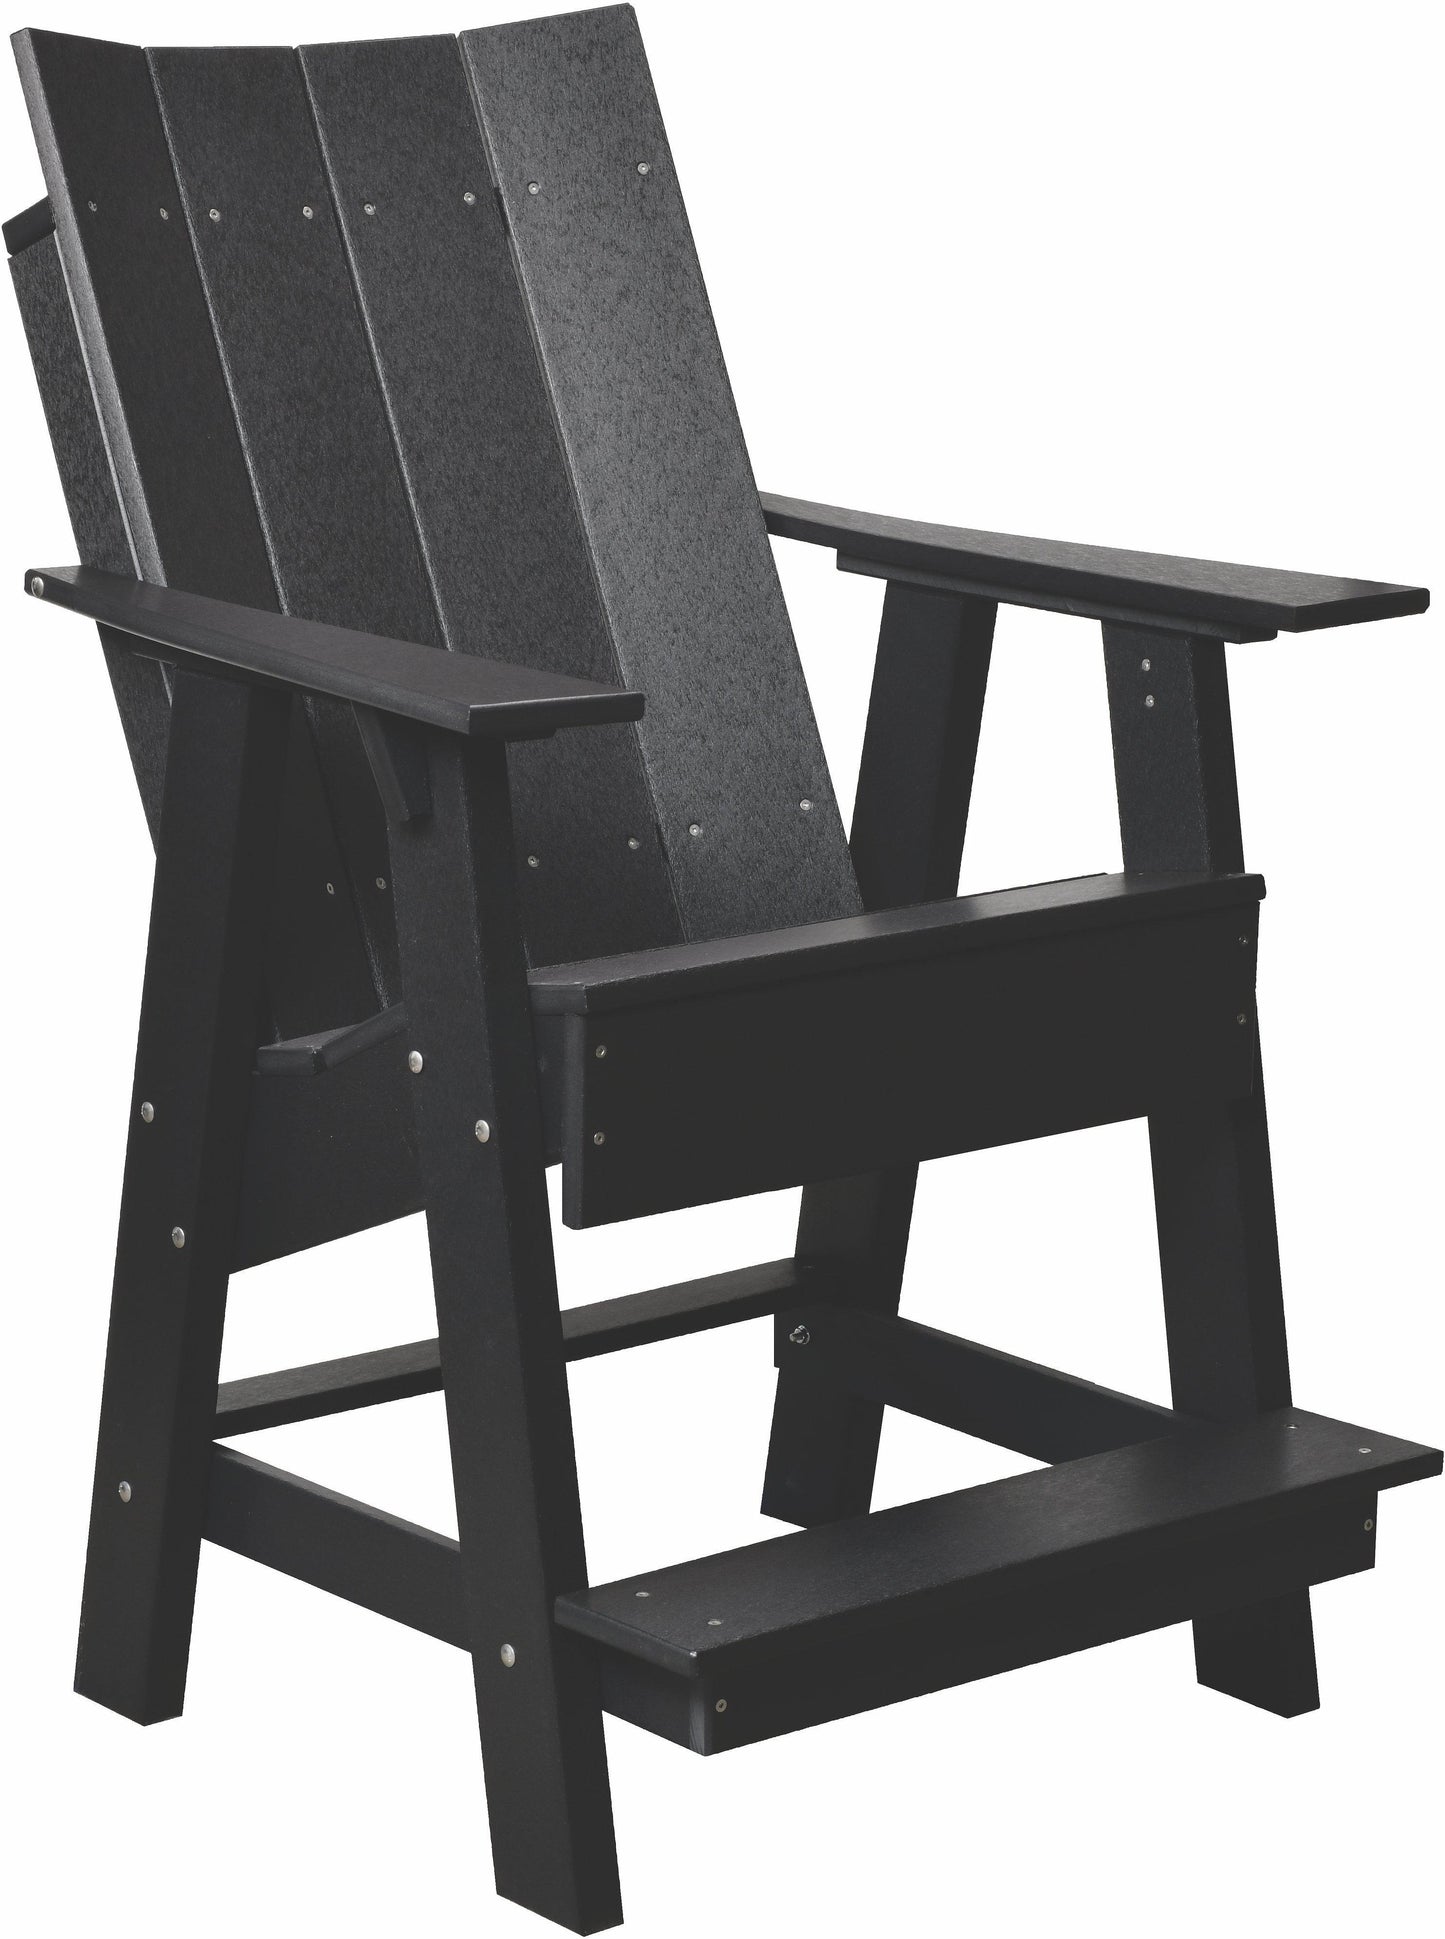 Wildridge Recycled Plastic Outdoor Contemporary Adirondack Balcony Chair  (COUNTER HEIGHT)- LEAD TIME TO SHIP 3 TO 4 BUSINESS DAYS - LEAD TIME TO SHIP 3 WEEKS